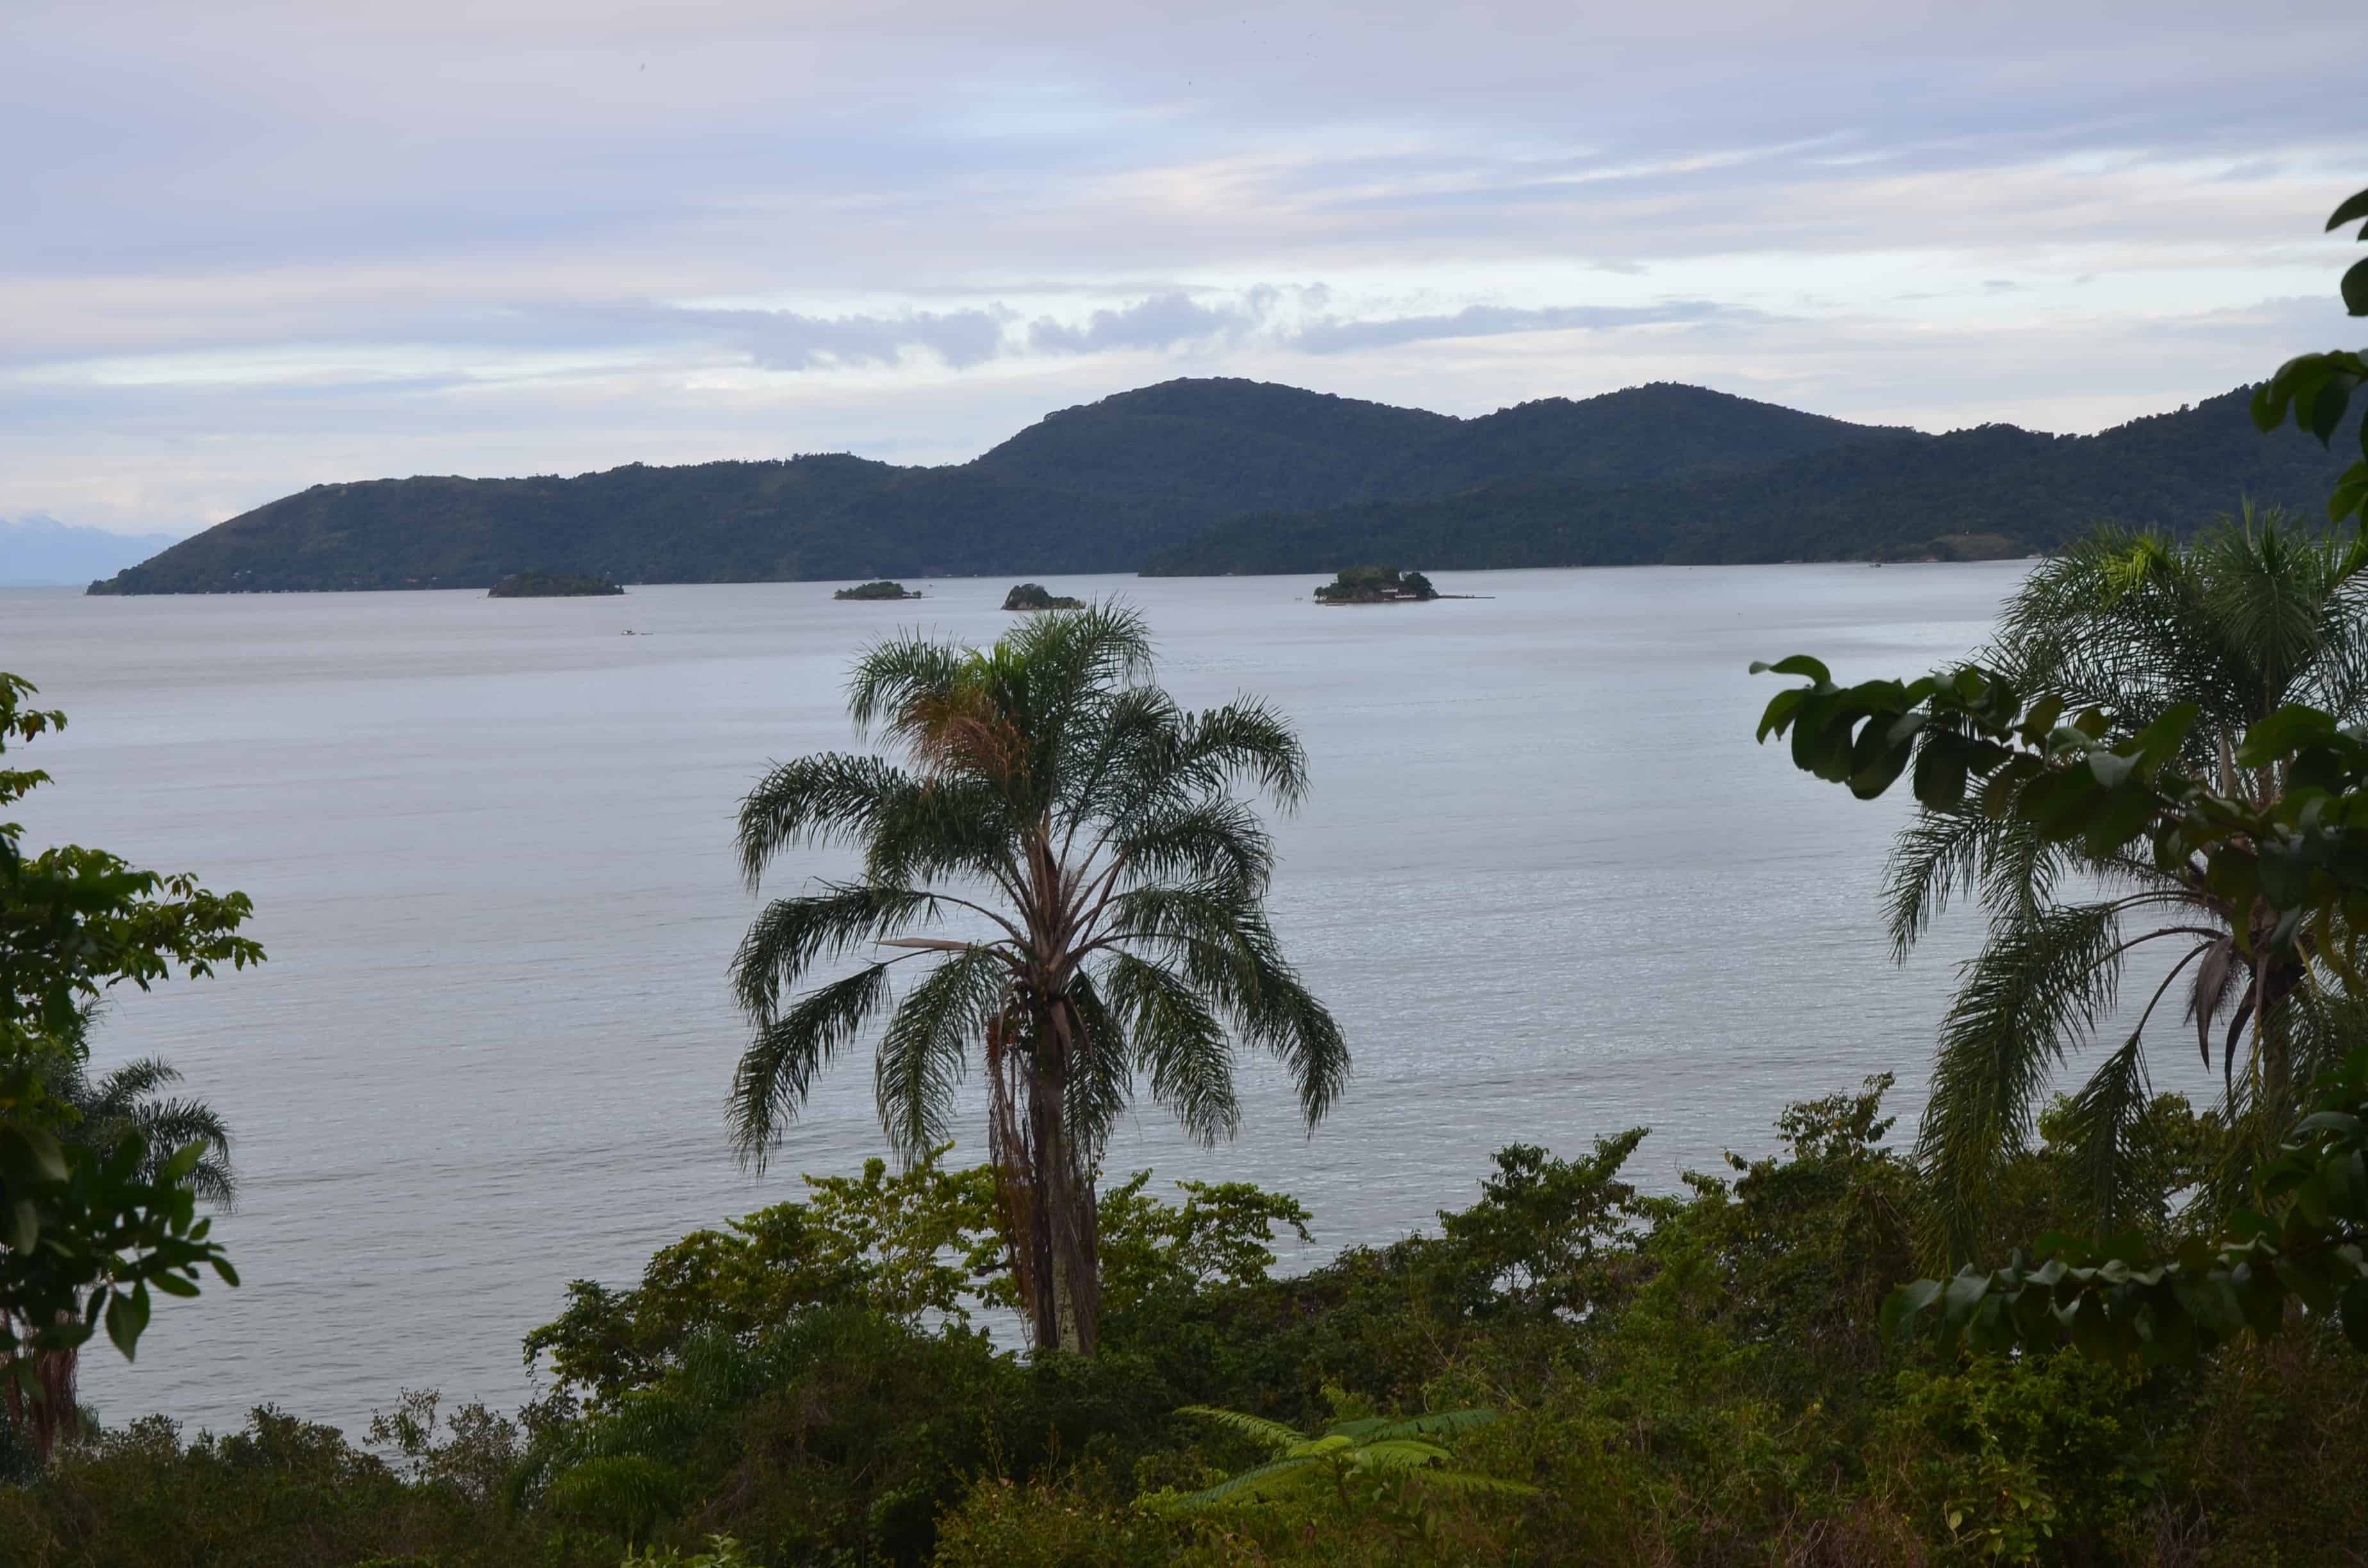 The view from Forte Defensor Perpétuo in Paraty, Brazil